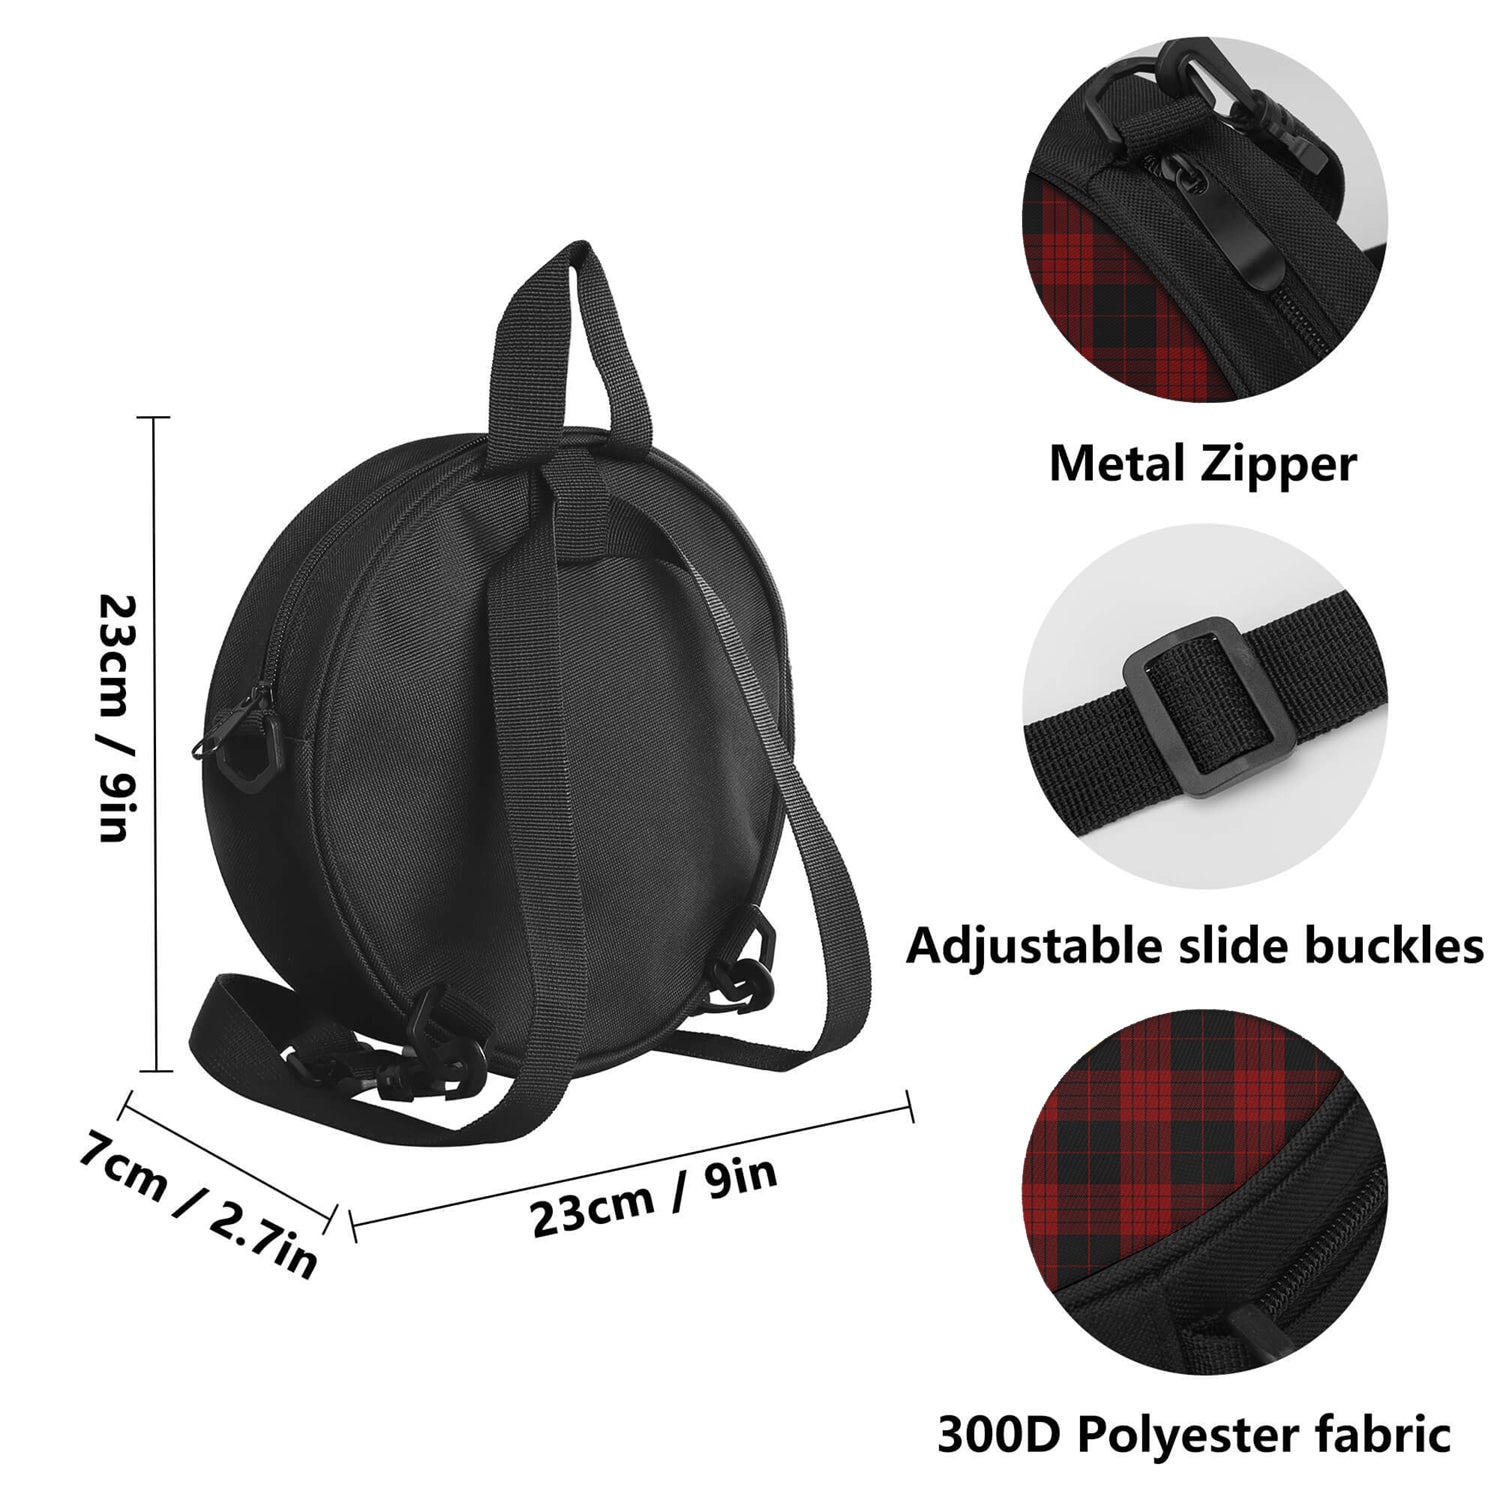 cameron-black-and-red-tartan-round-satchel-bags-with-family-crest